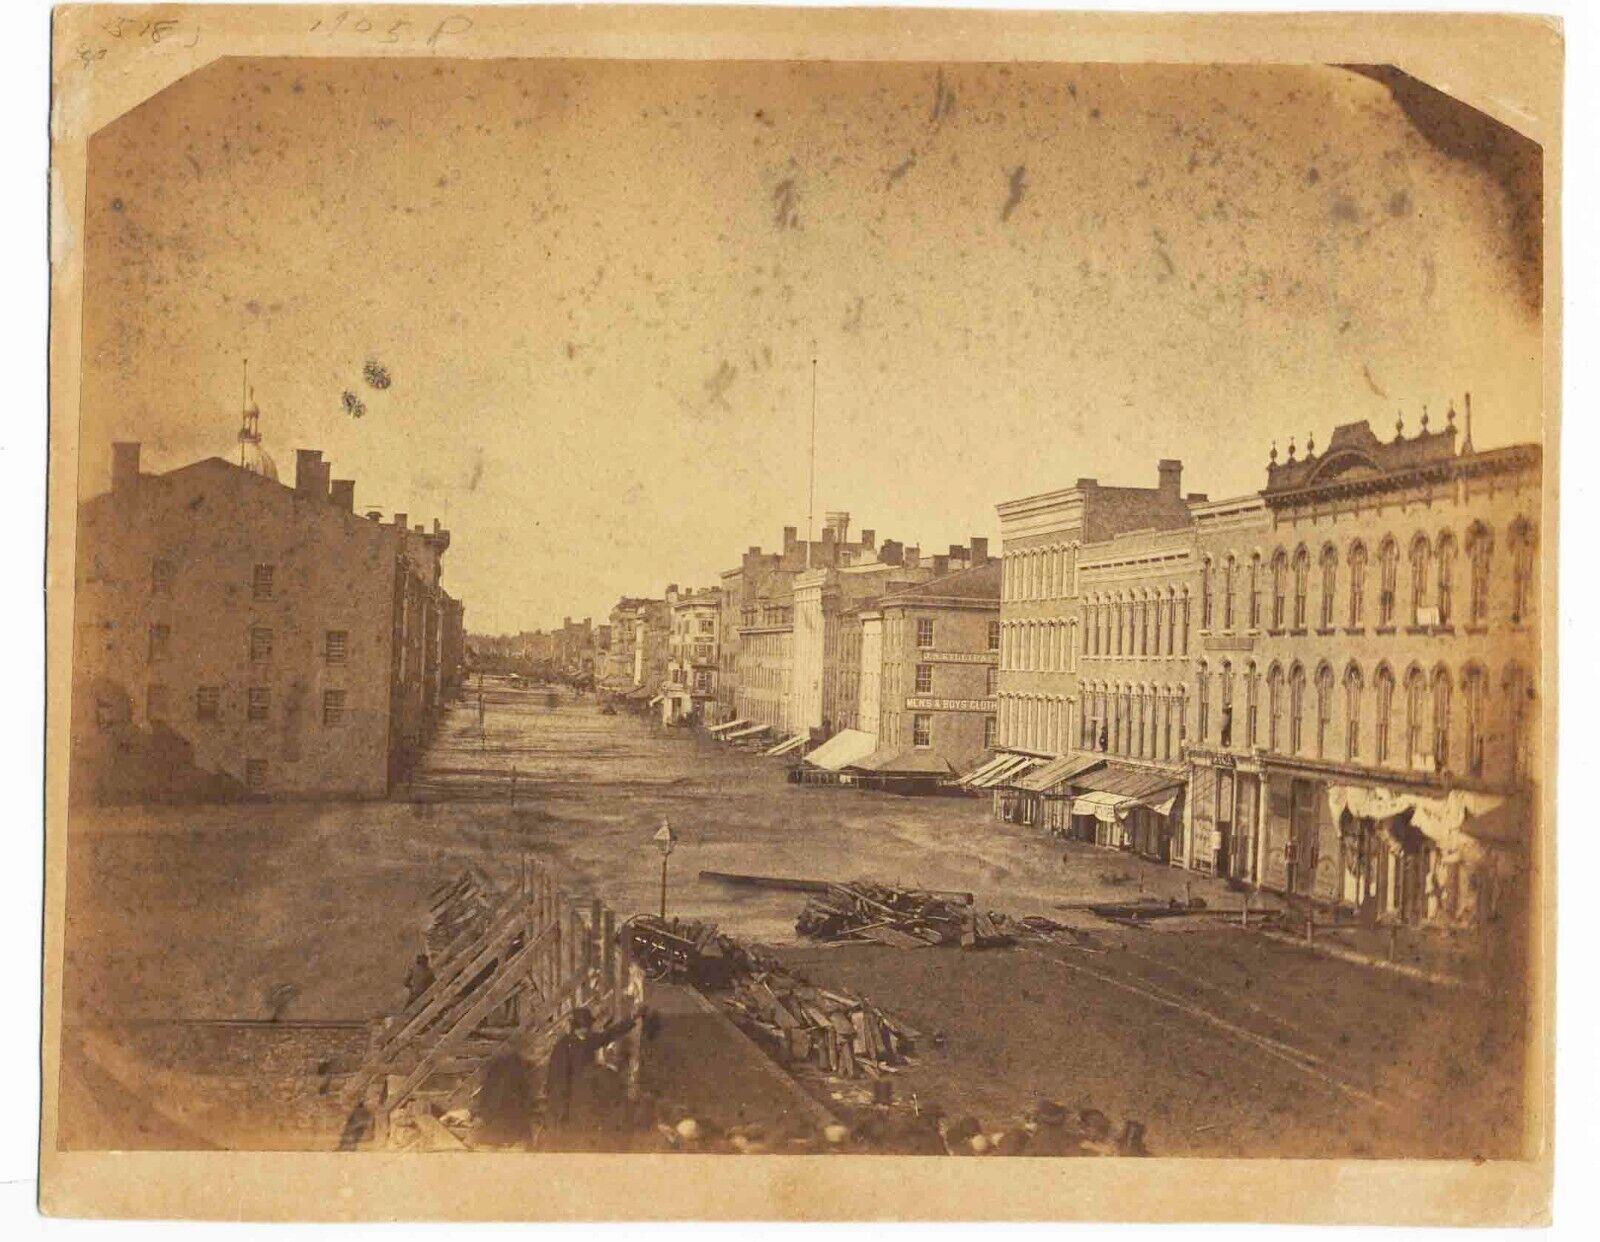 ICONIC March 1865 Albumen Photograph of GREAT FLOOD at ROCHESTER NY - Down Main